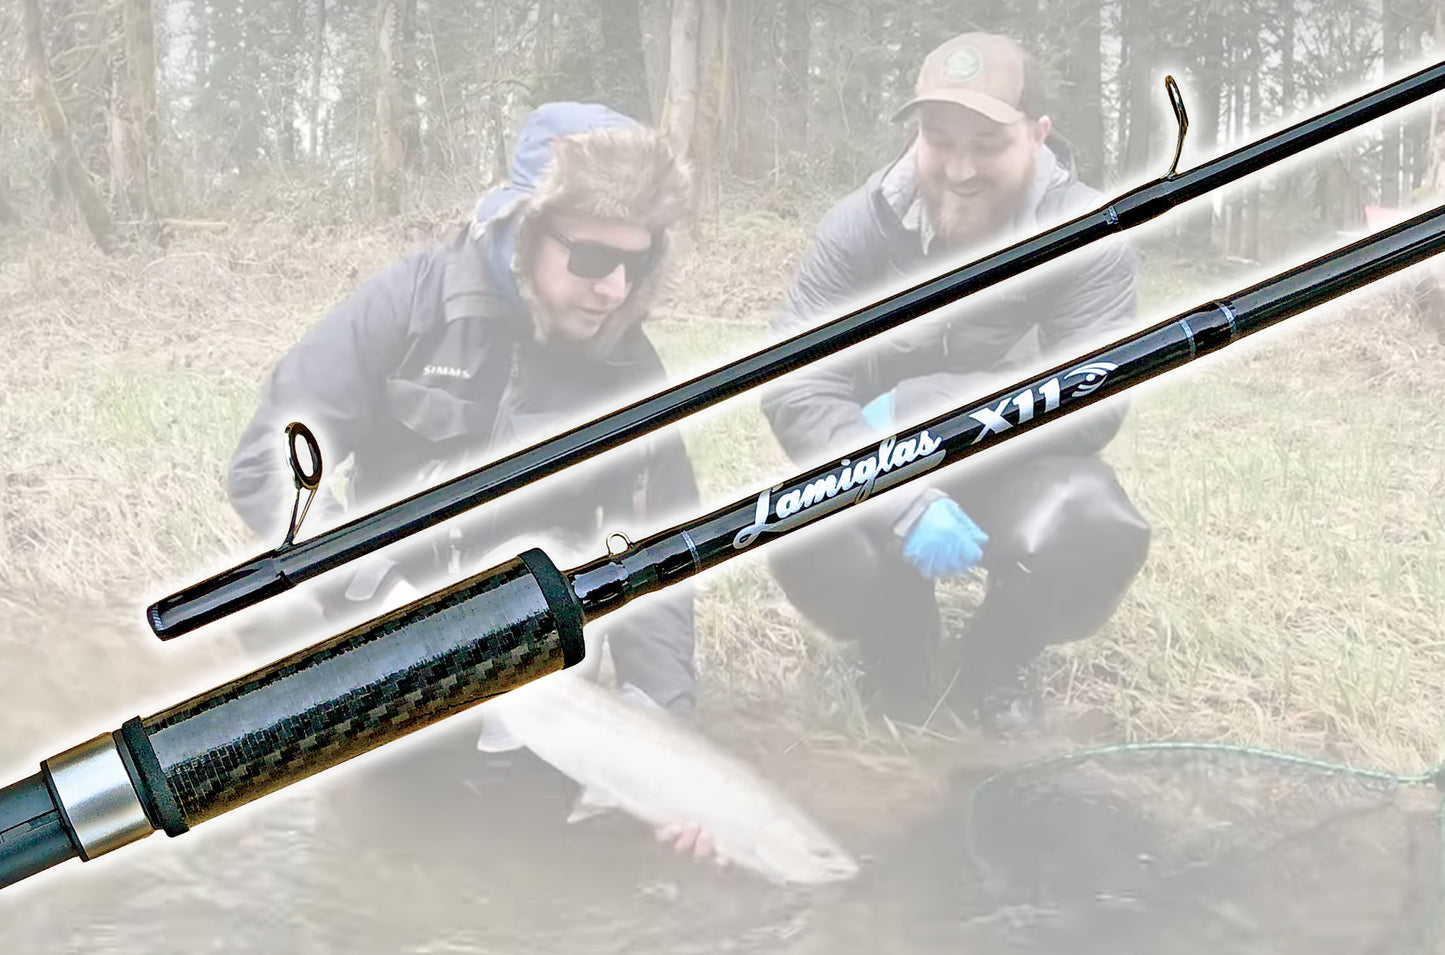 Lamiglas X11 10' 6" Float Rod - PLUS a FREE 2-year subscription to STS